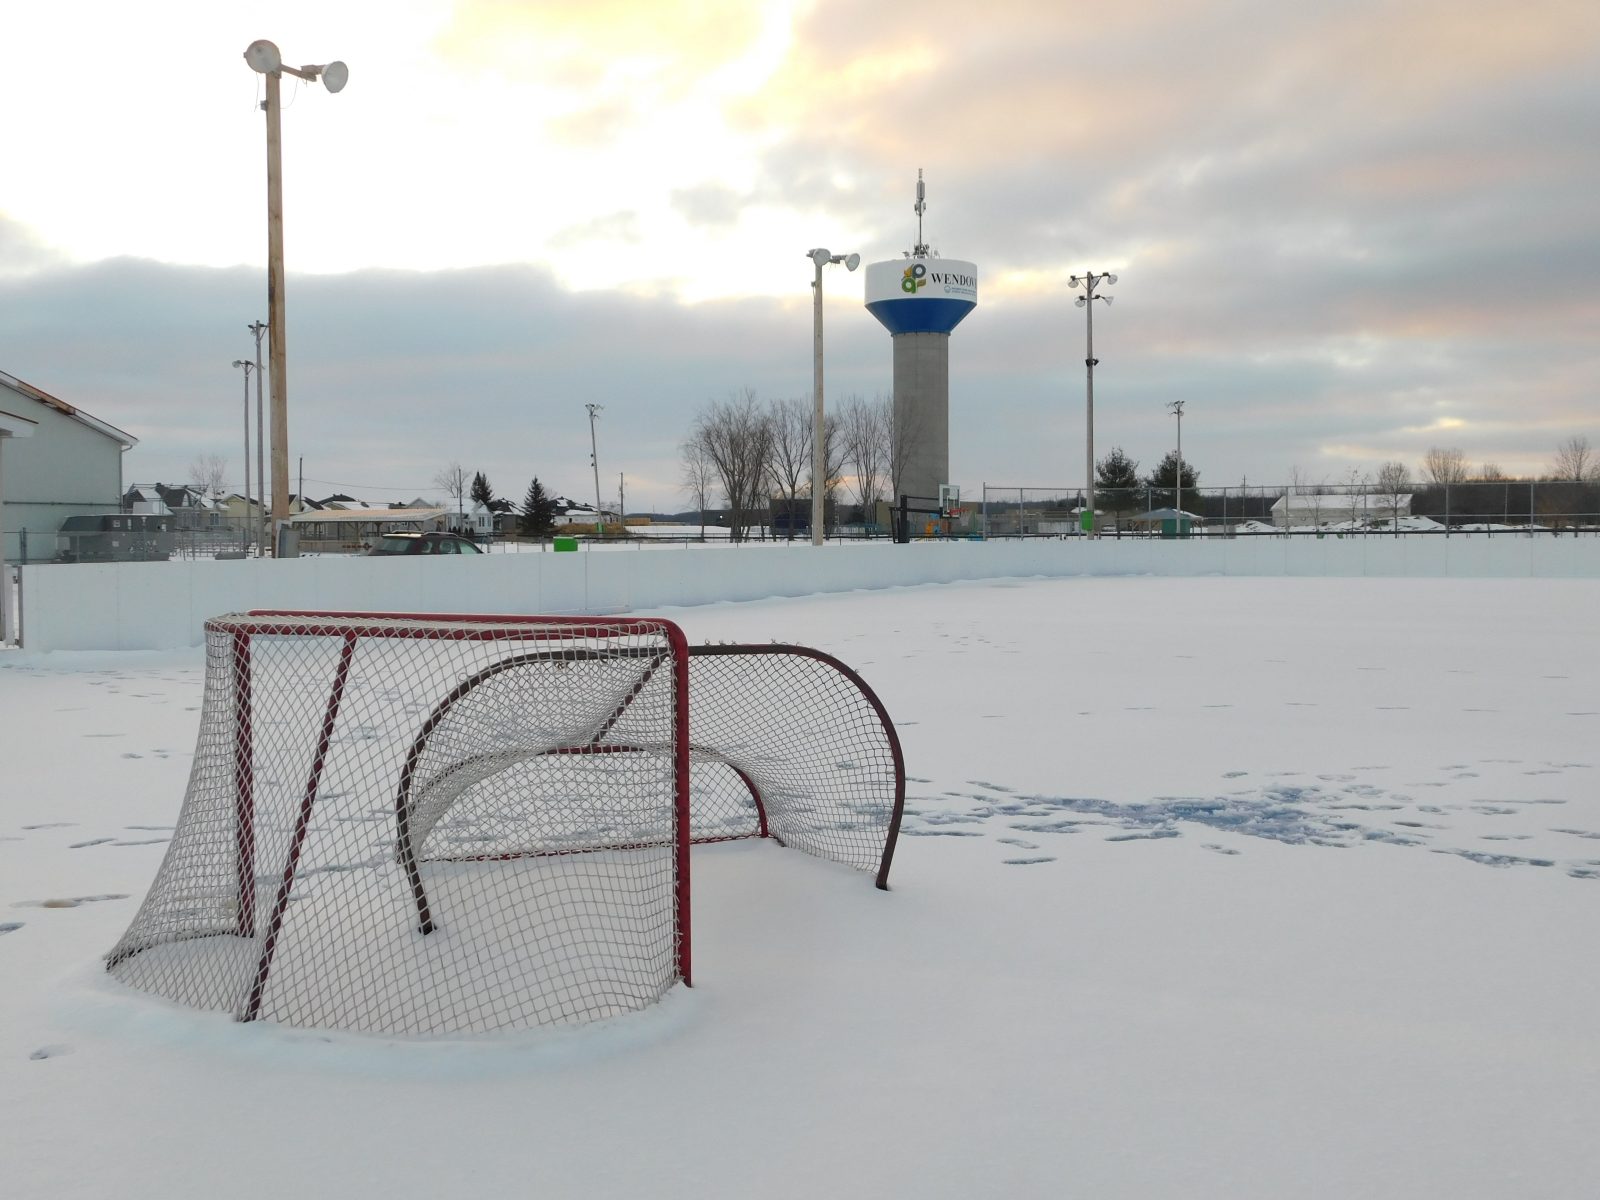 Skating rinks will be open this winter